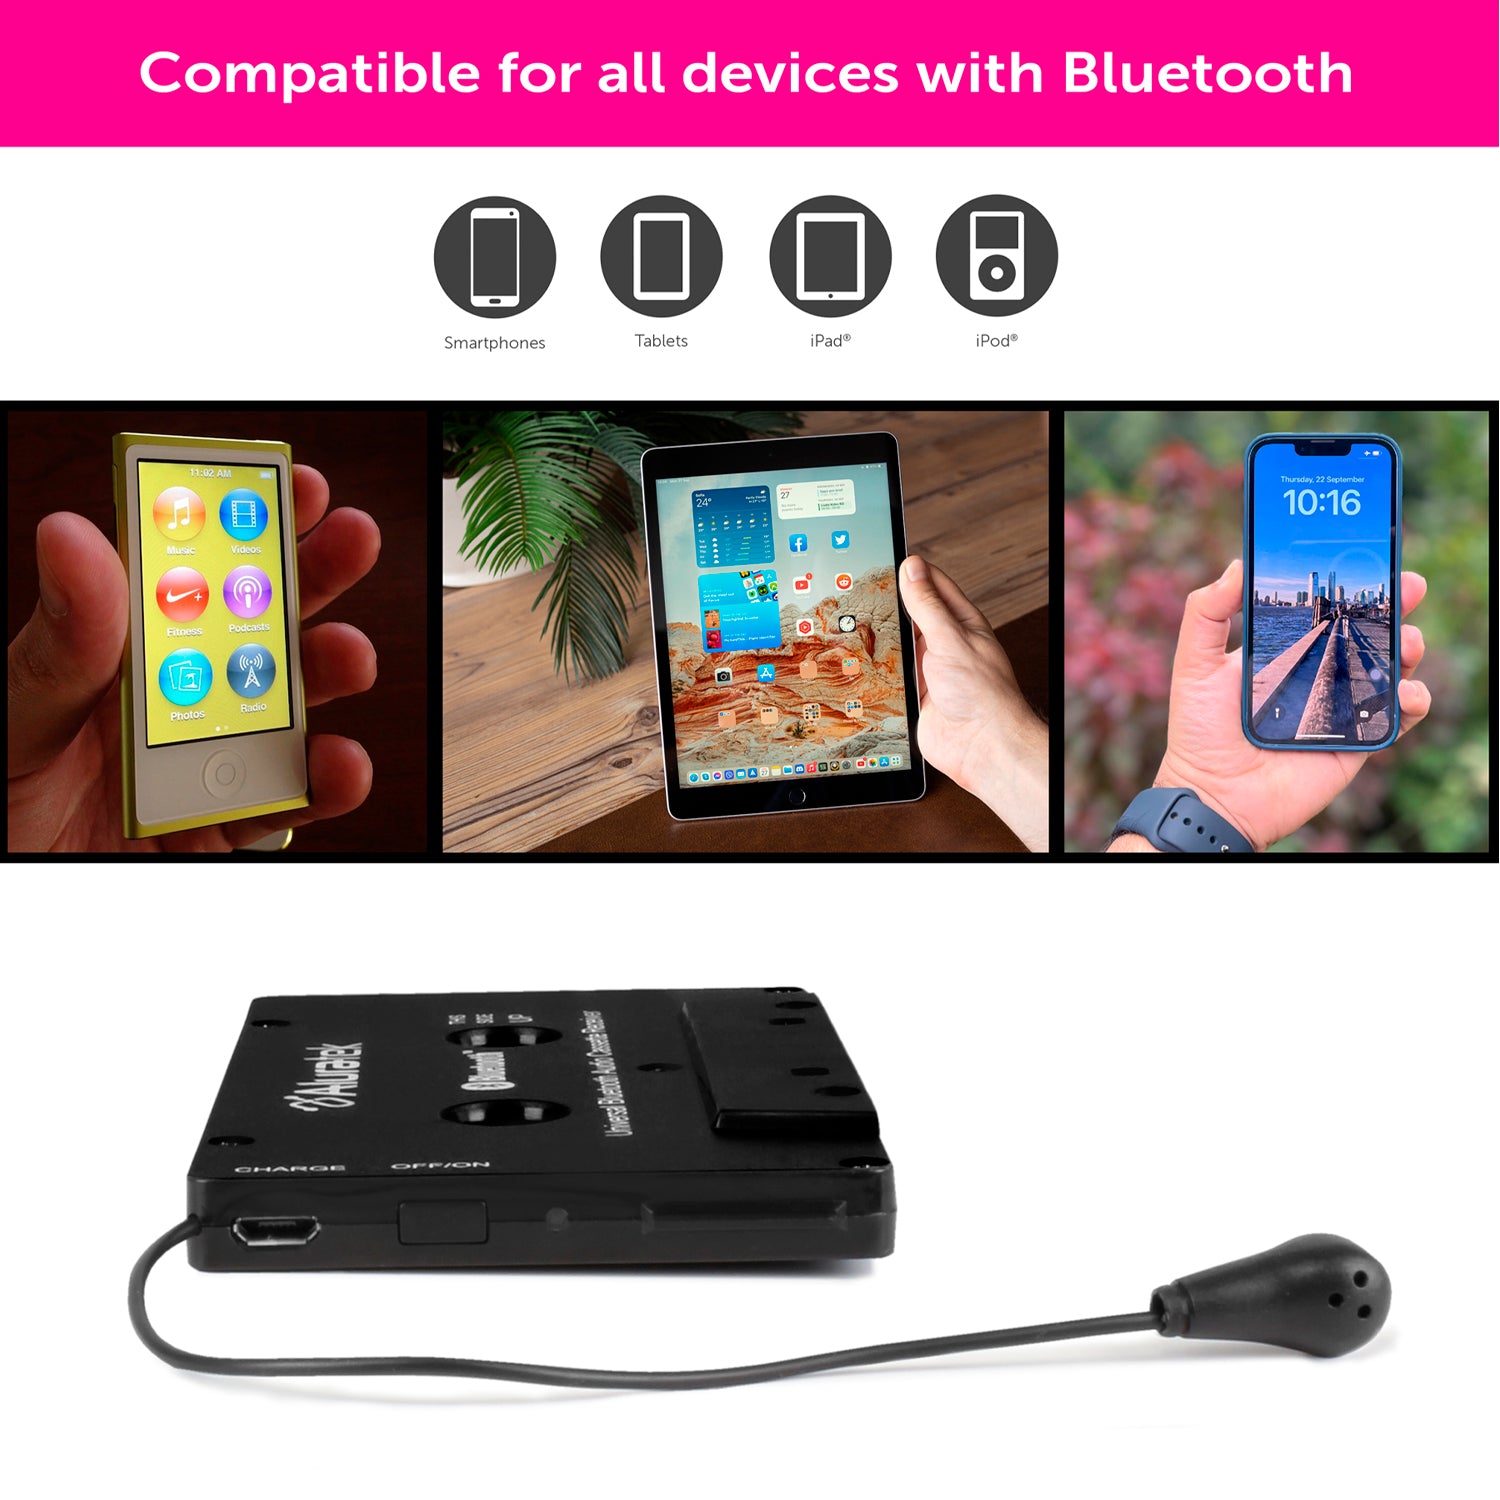 Bluehive Bluetooth Audio Cassette Adapter with Built-in Microphone, Black